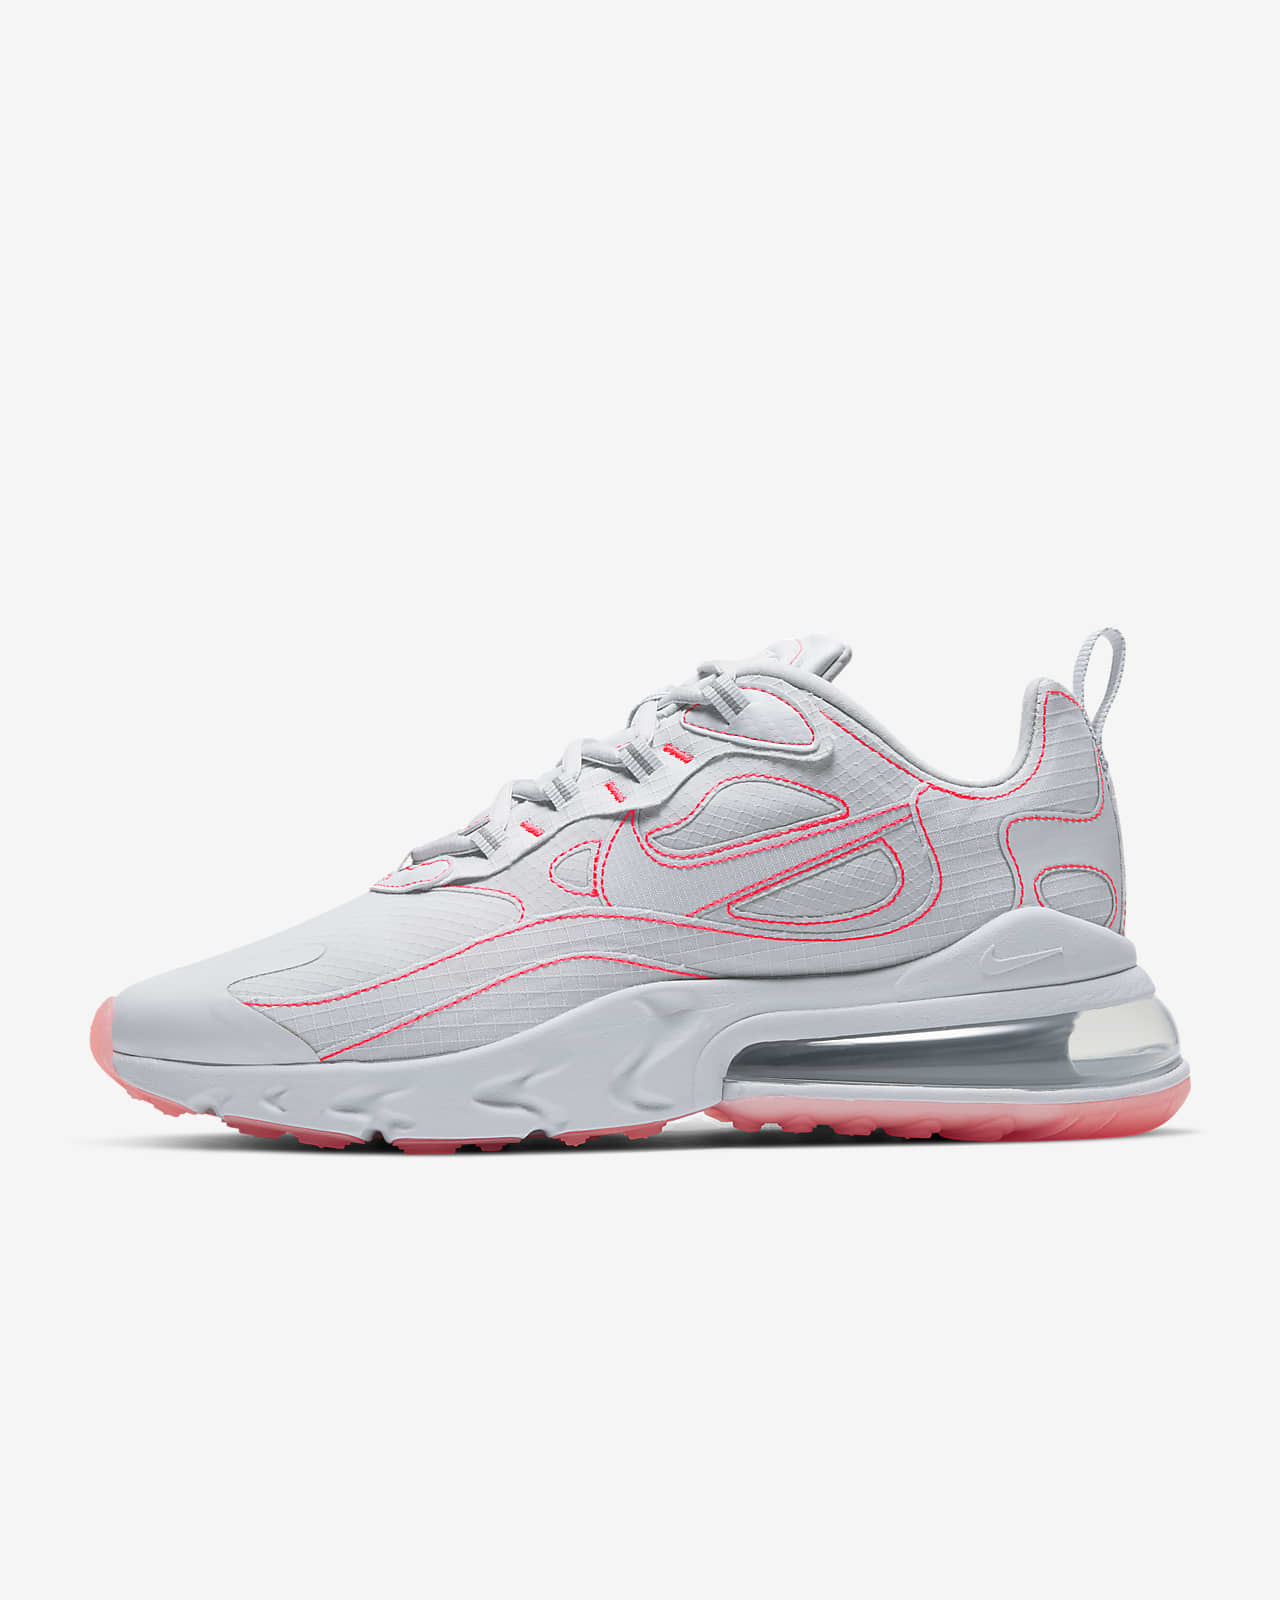 nike air max 270 special - 58% remise 